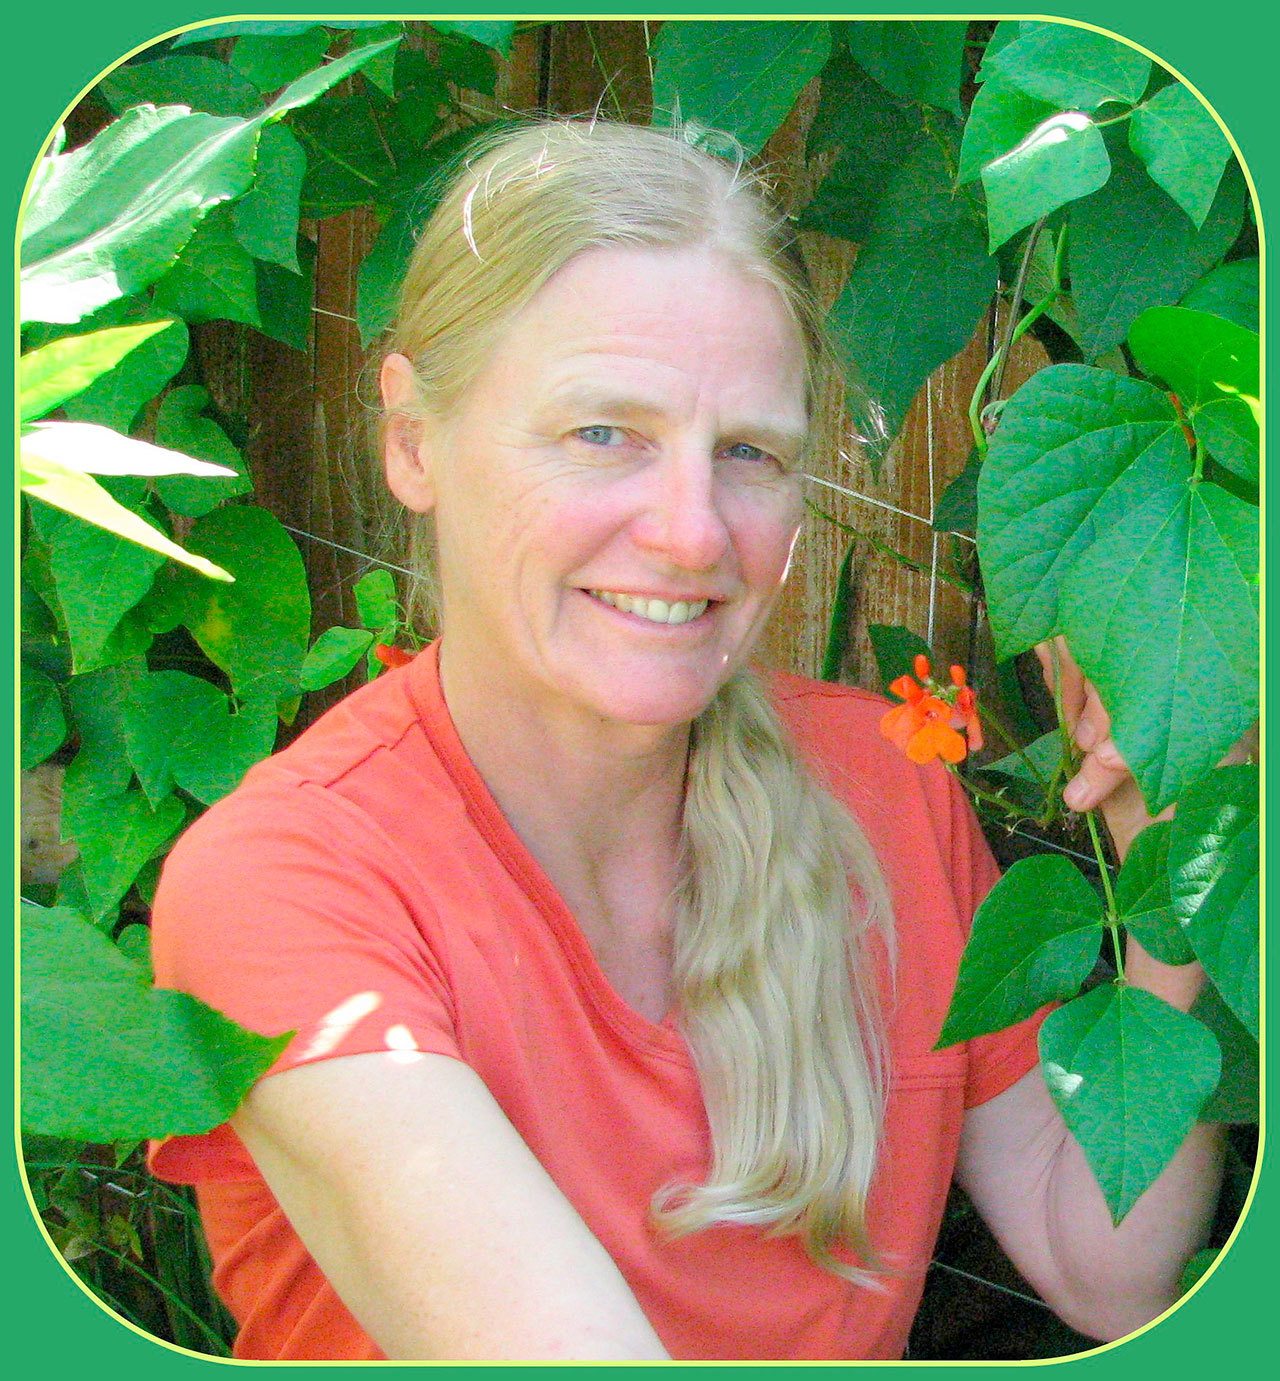 Selinda Barkhuis will present information on growing and using culinary herbs in soups, salads and teas at noon Thursday, March 9, at the county commissioners meeting room of the Clallam County Courthouse, 223 E. Fourth St., Port Angeles. The presentation is part of the Green Thumb Gardening Tips educational series sponsored by the Clallam County Master Gardeners. Submitted photo